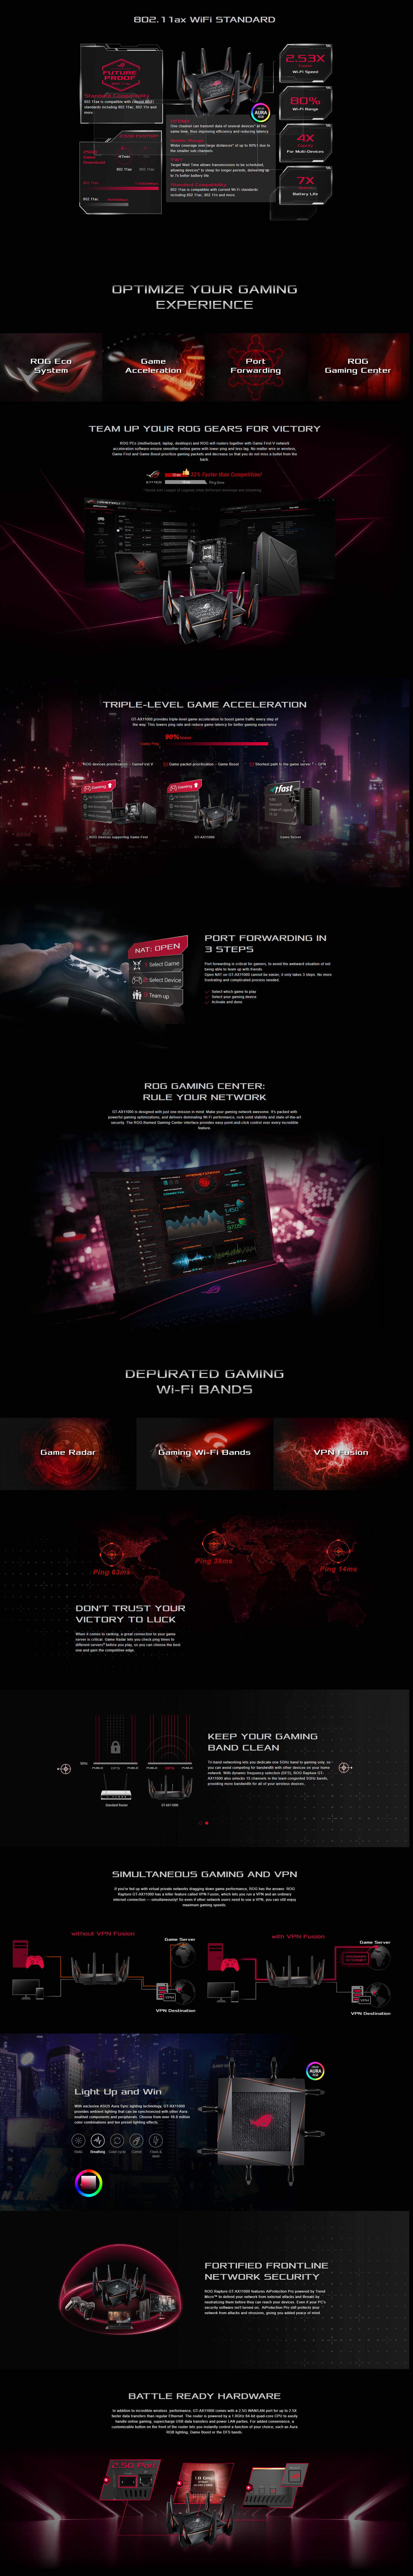 A large marketing image providing additional information about the product ASUS ROG Rapture GT-AX11000 802.11ax Tri-Band WiFi 6 10GigE Gaming Router - Additional alt info not provided